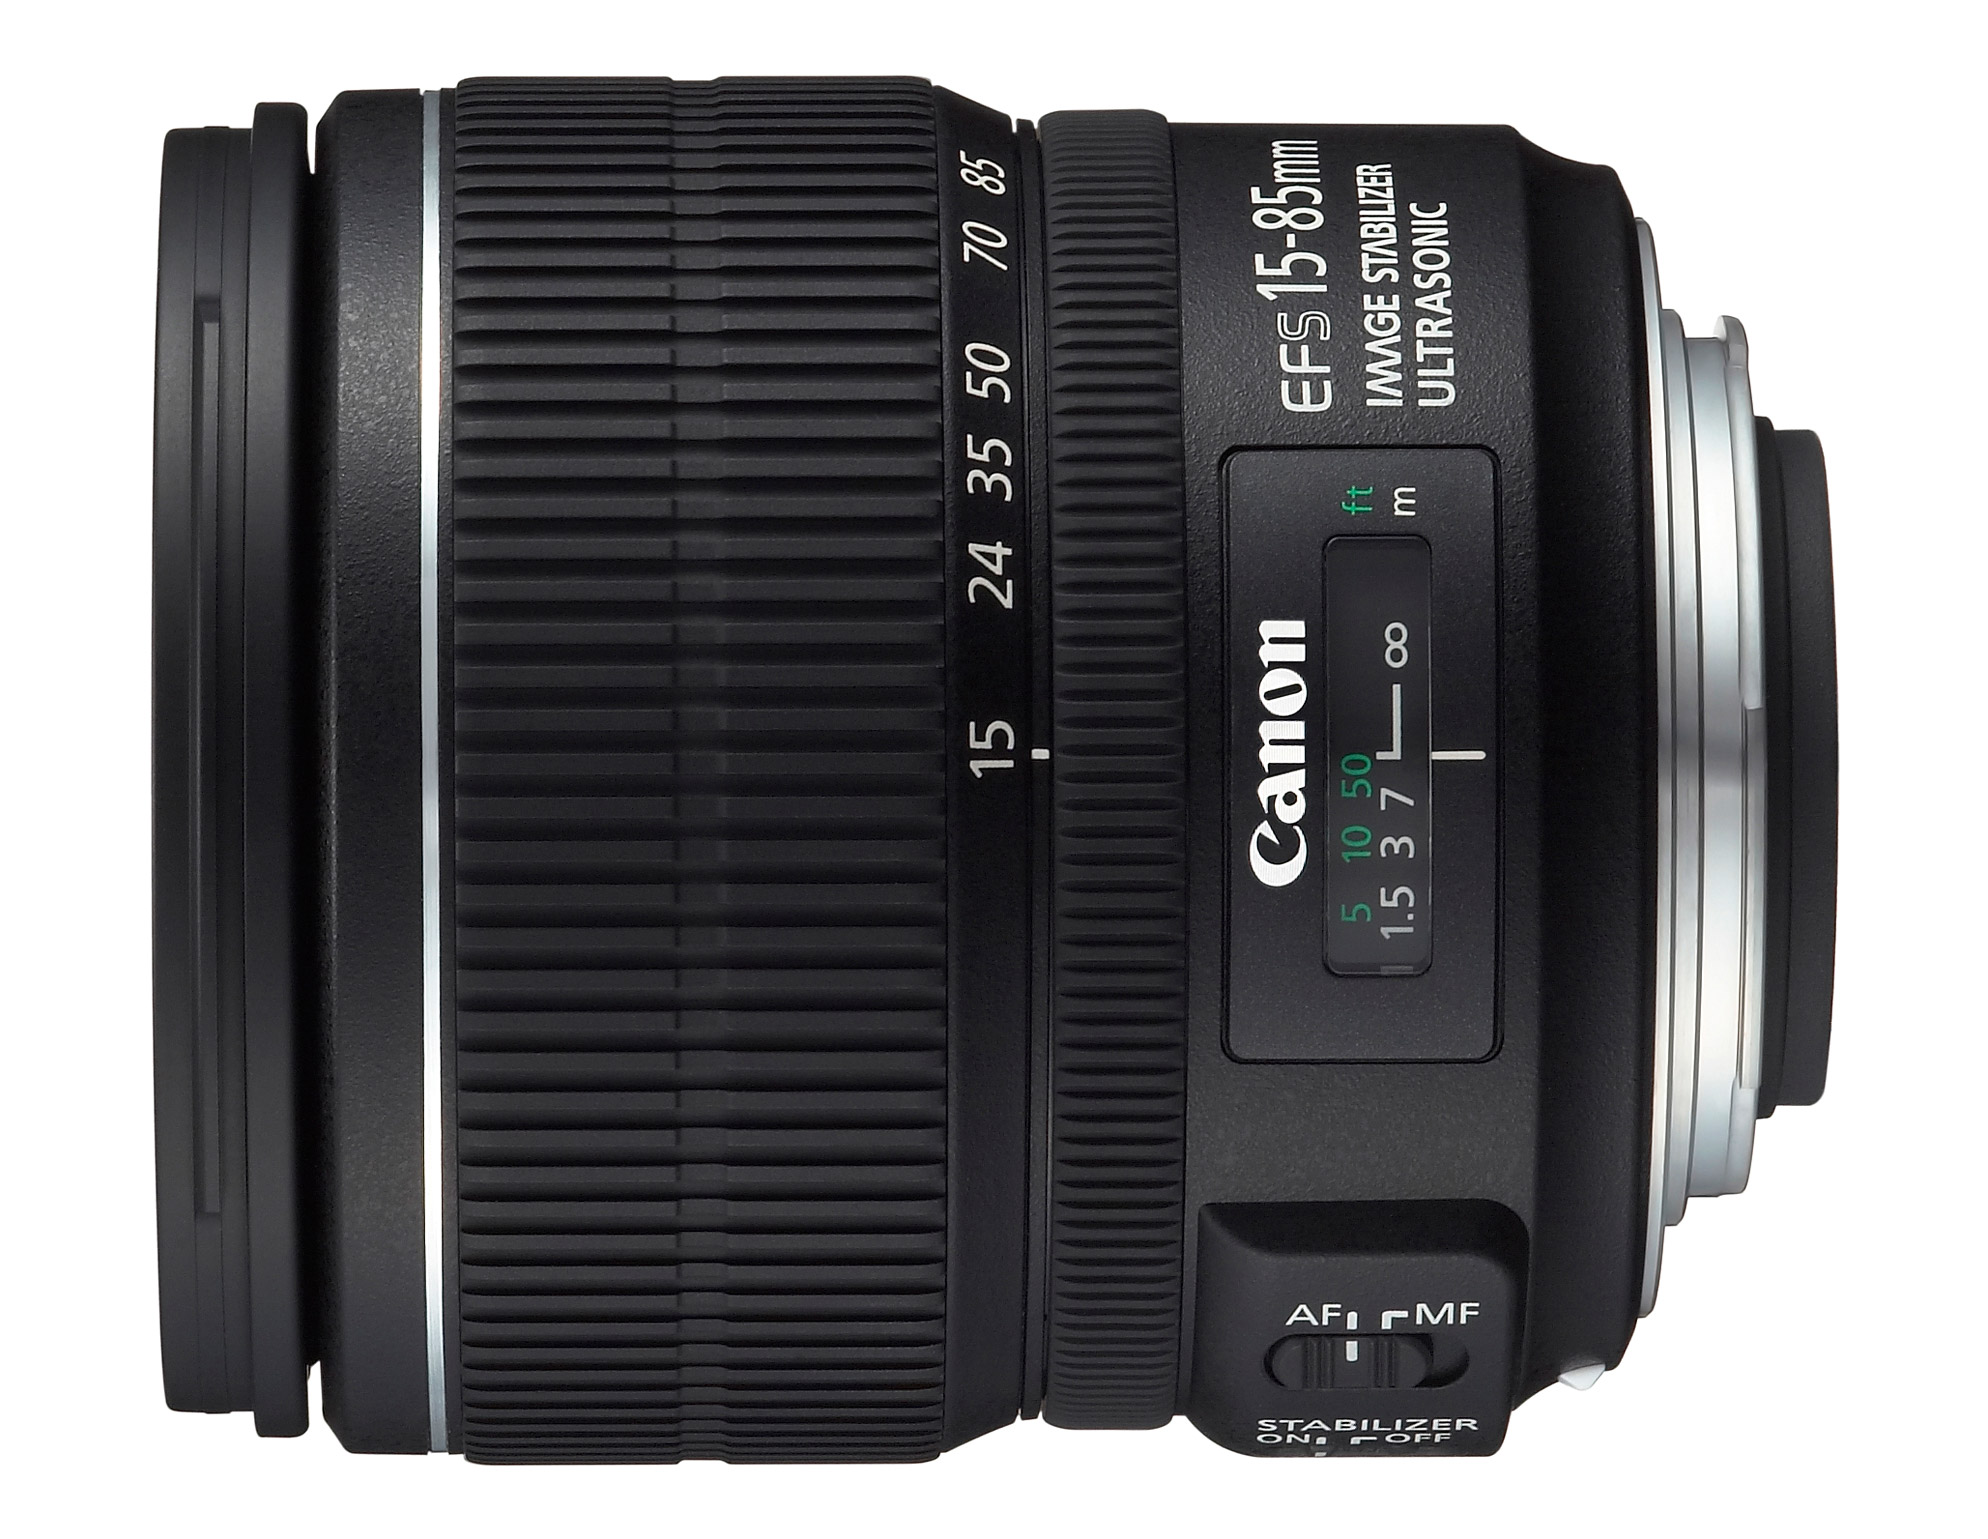 Canon EF-S 15-85mm f/3.5-5.6 IS USM